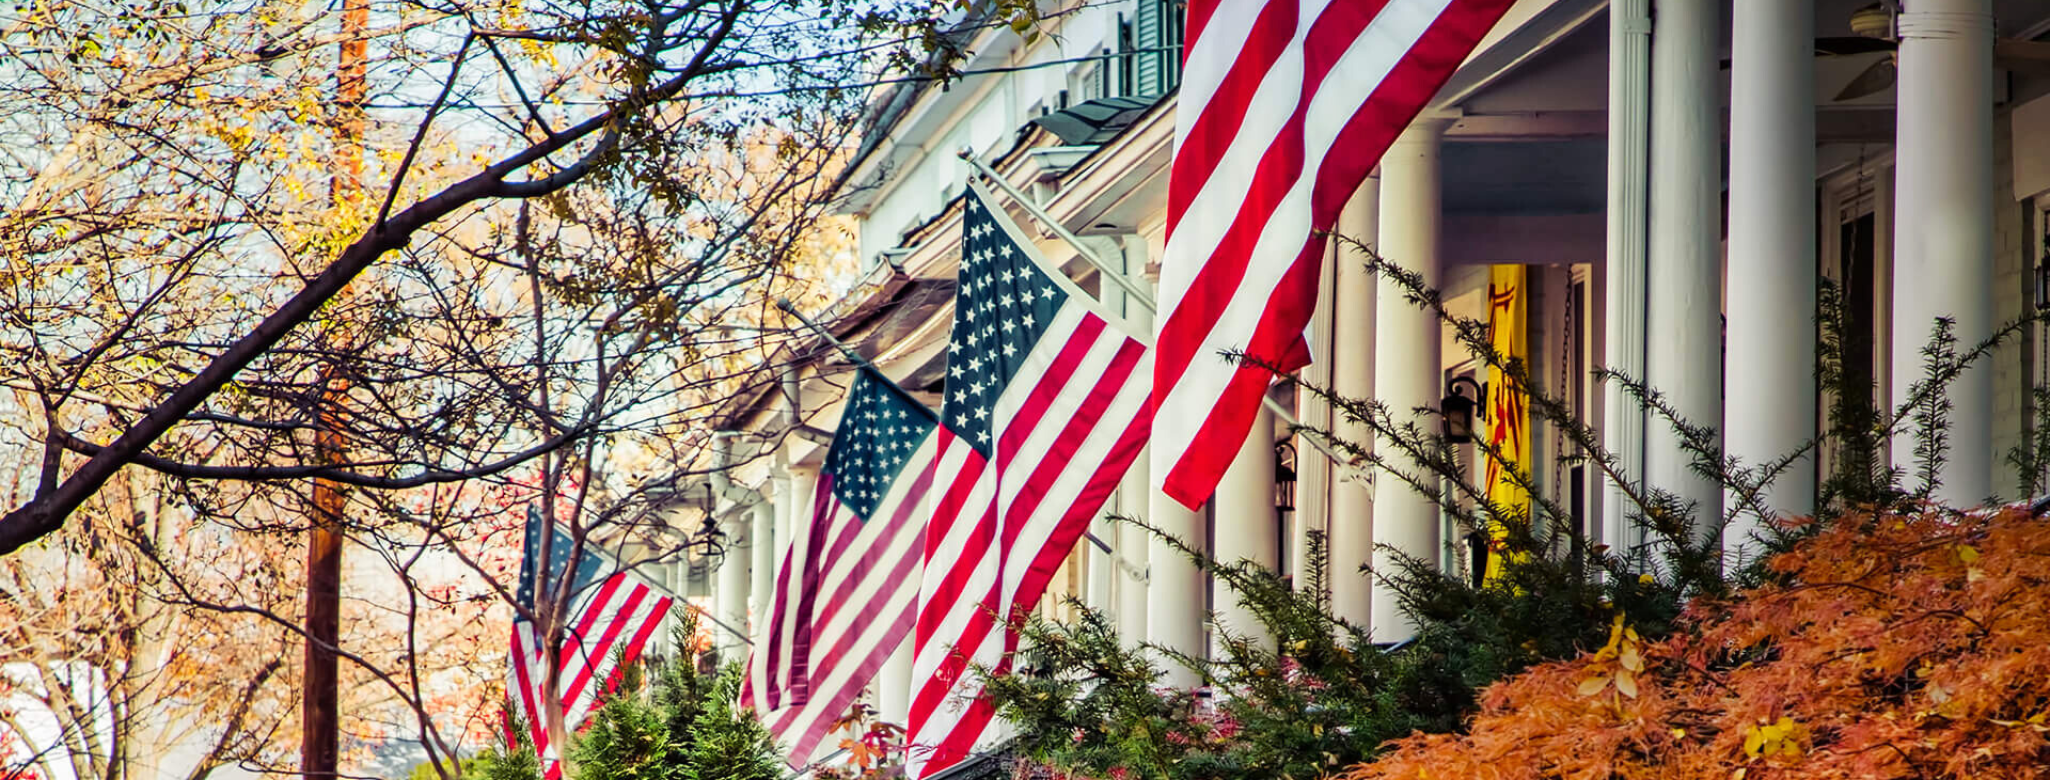 7 Tips for Caring for Your American Flag at Home